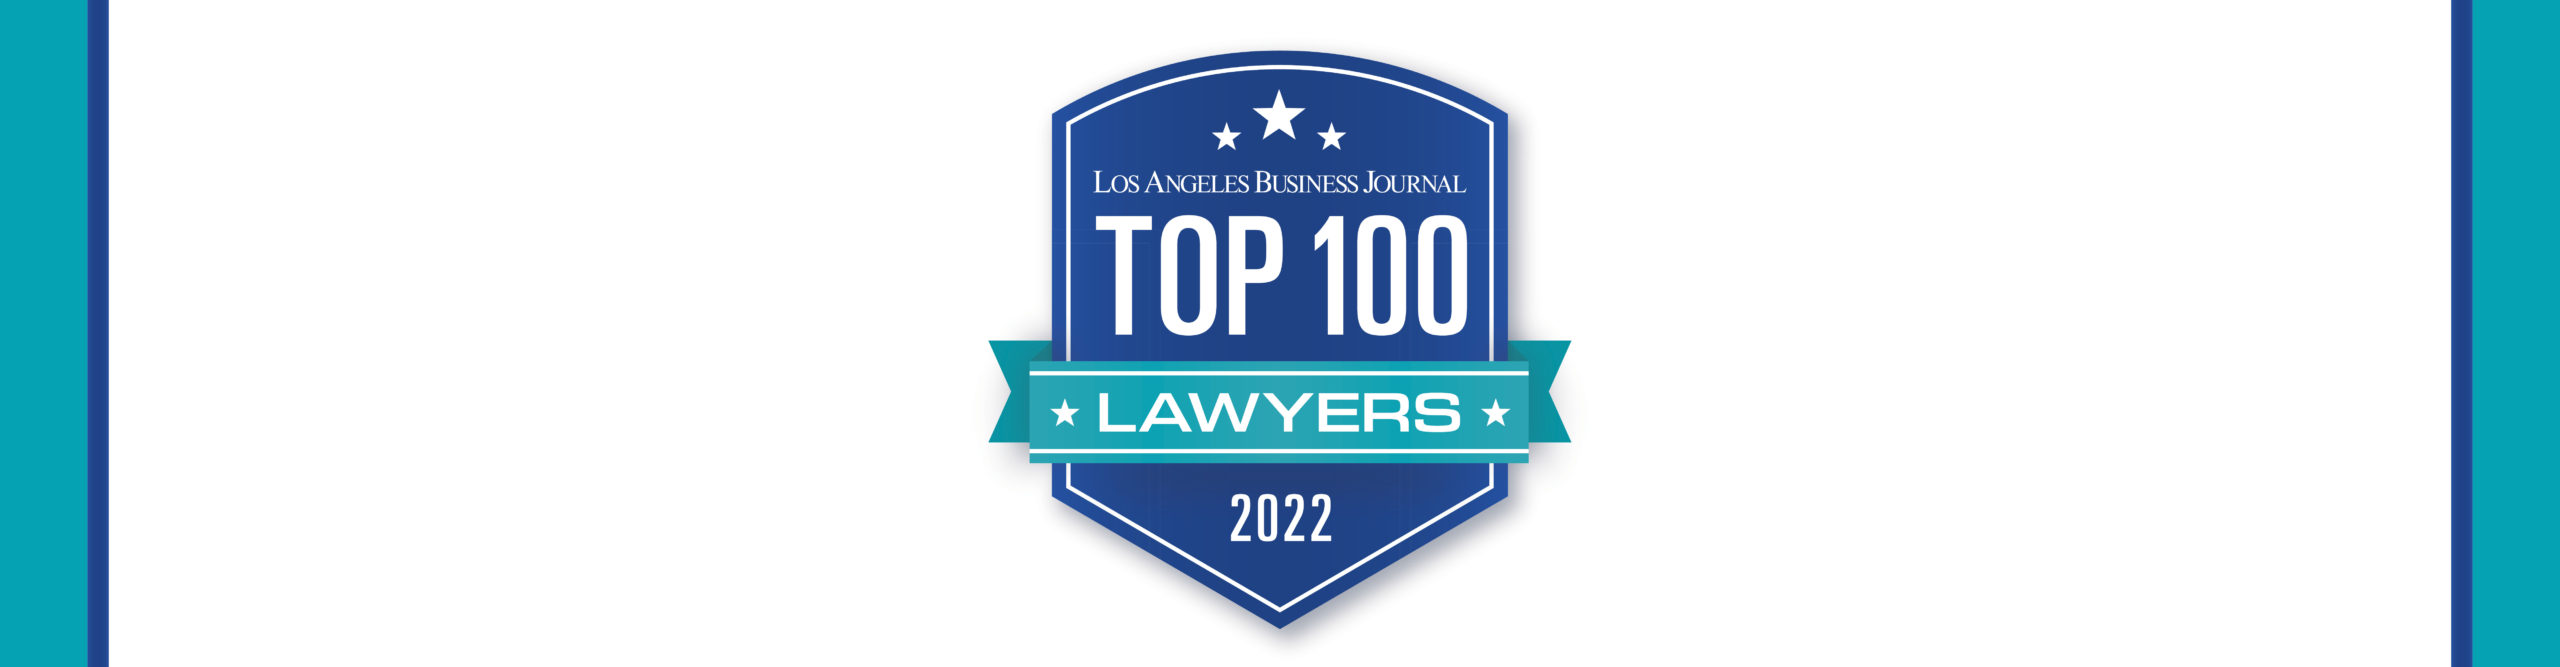 Top 100 Lawyers Event Banner